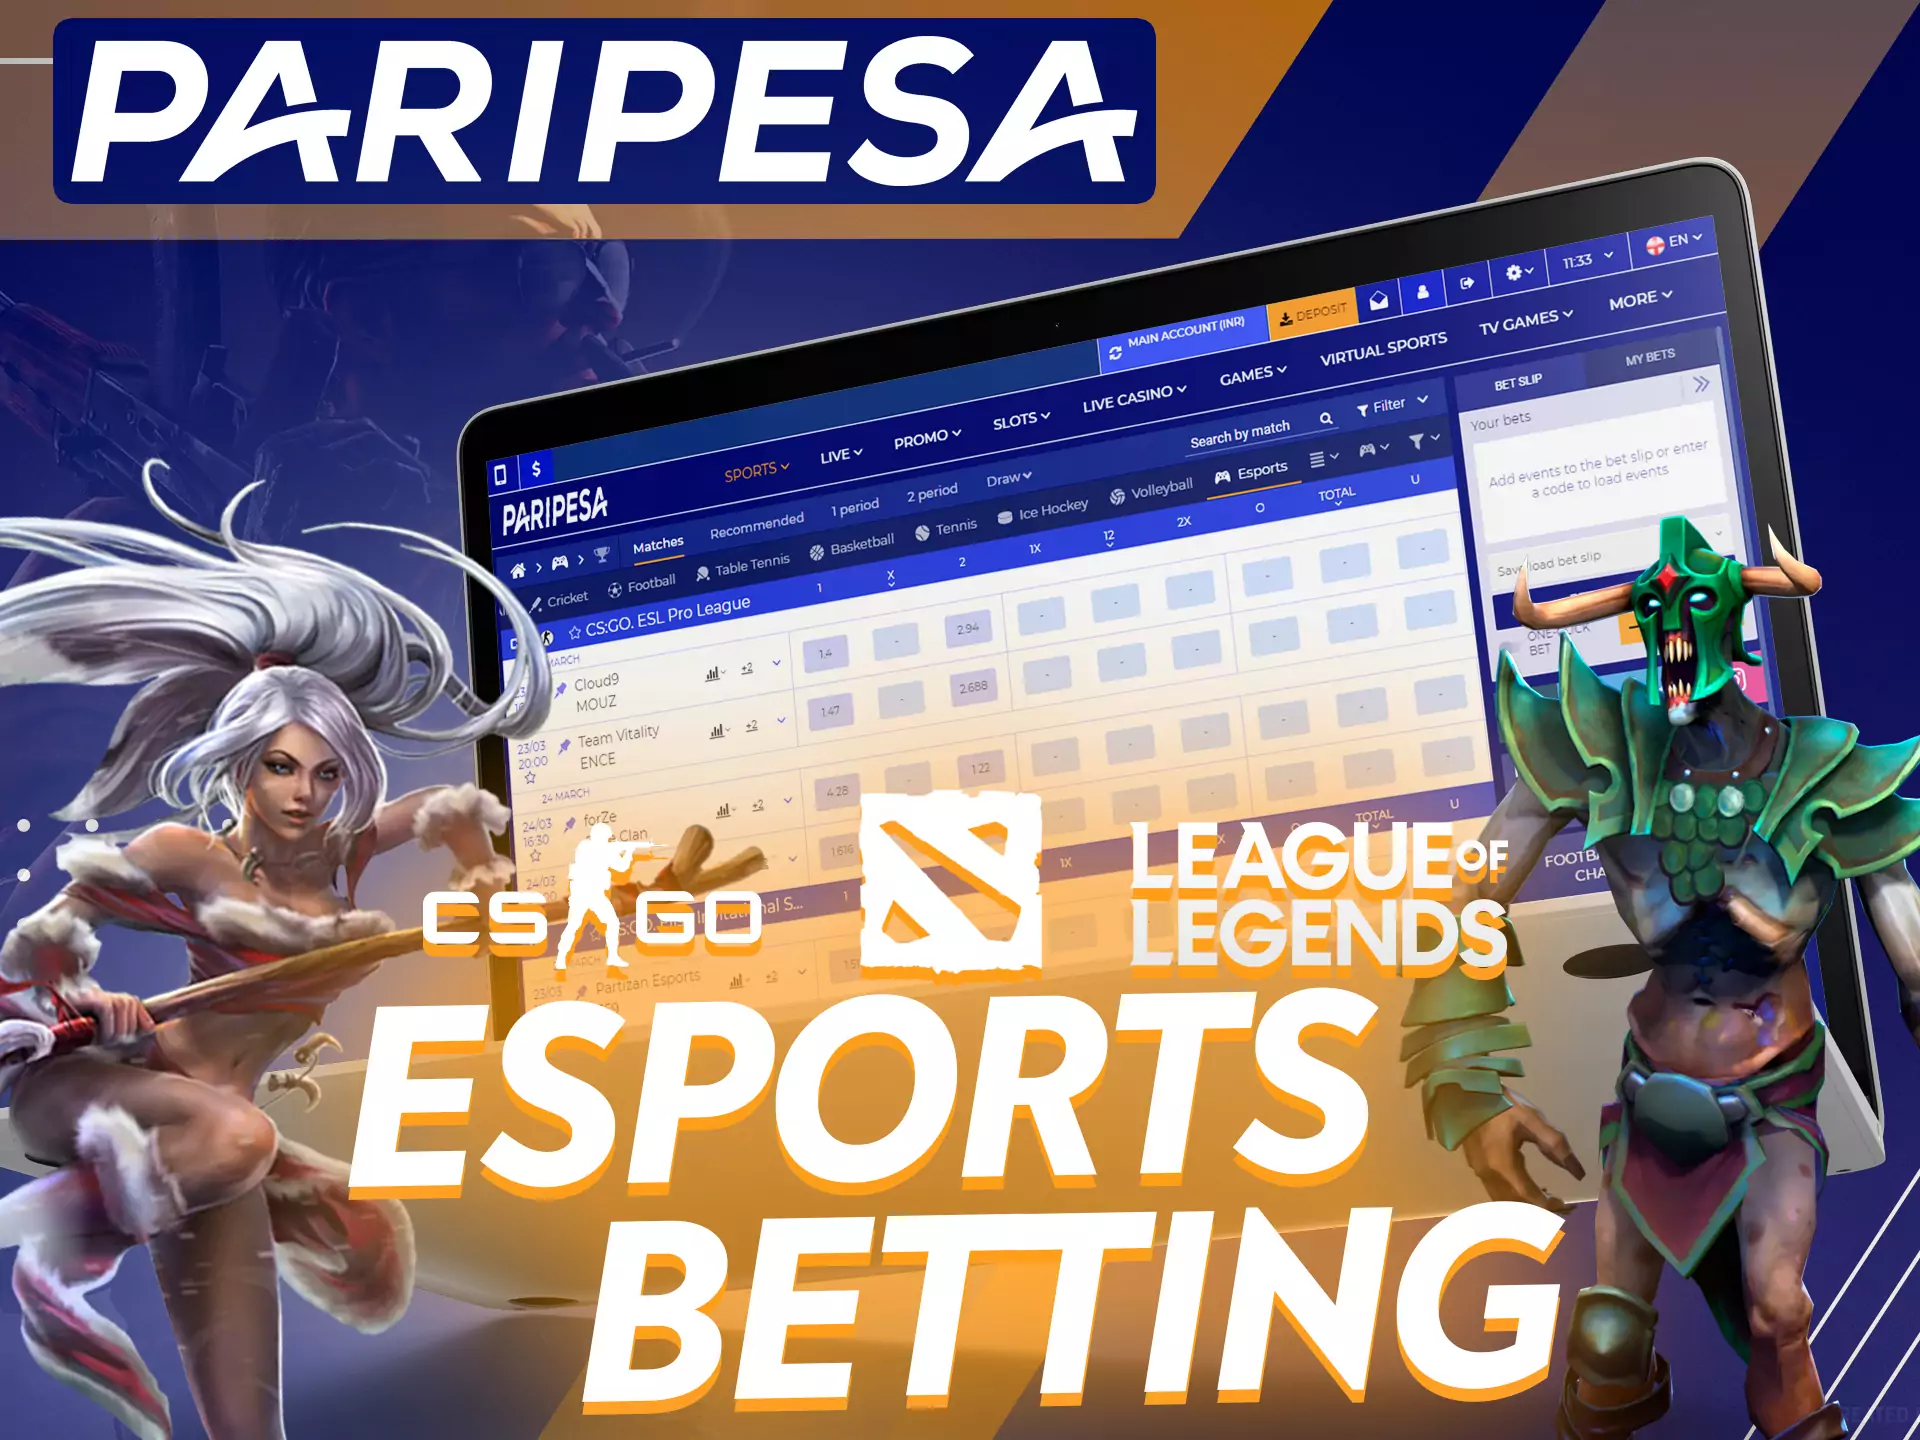 On Paripesa, bet on esport if you are a real fan.